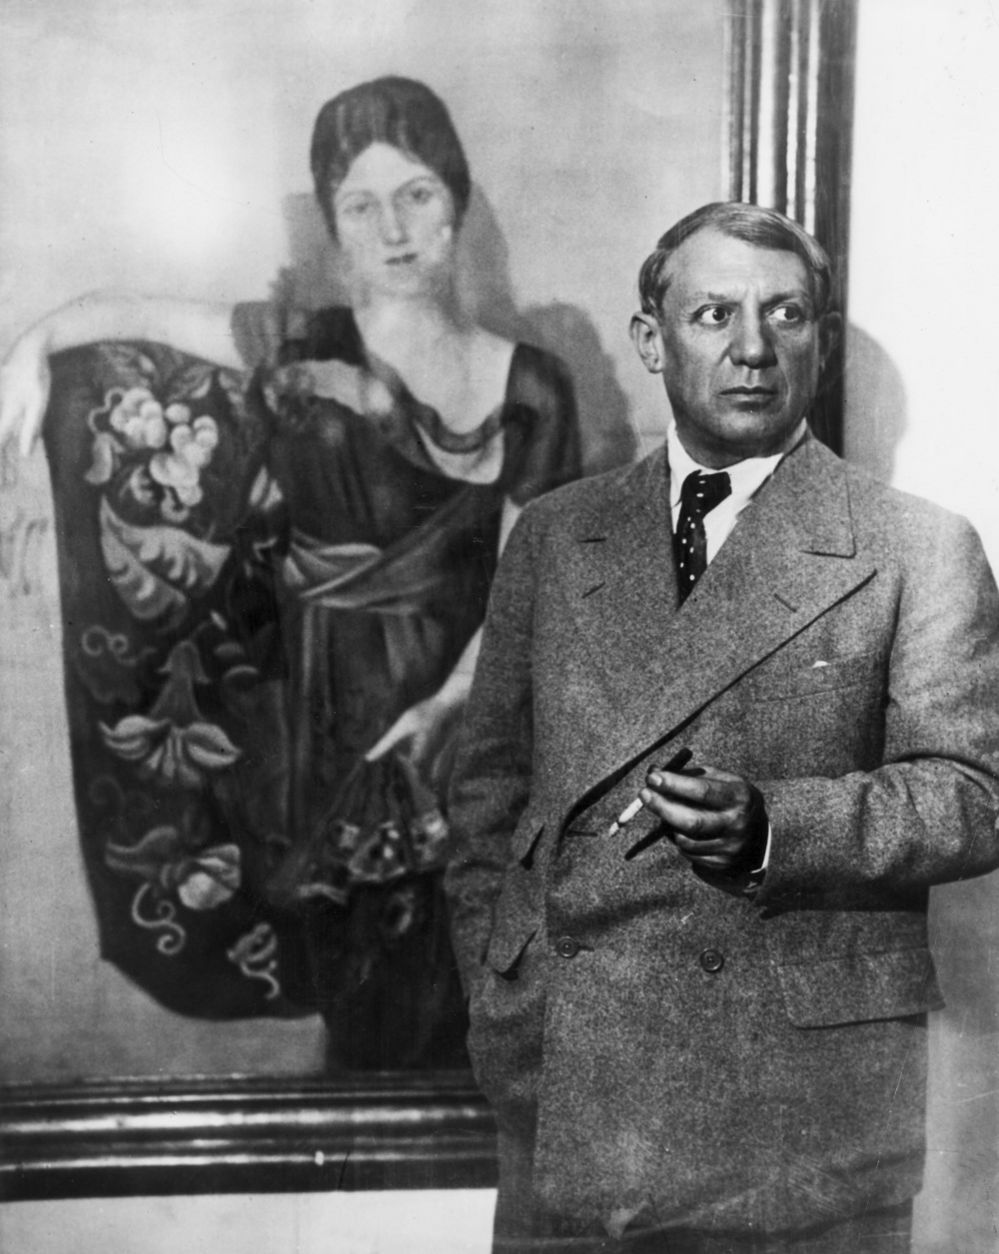 Picasso stands in front of the portrait he created of his wife Olga Khokhlova